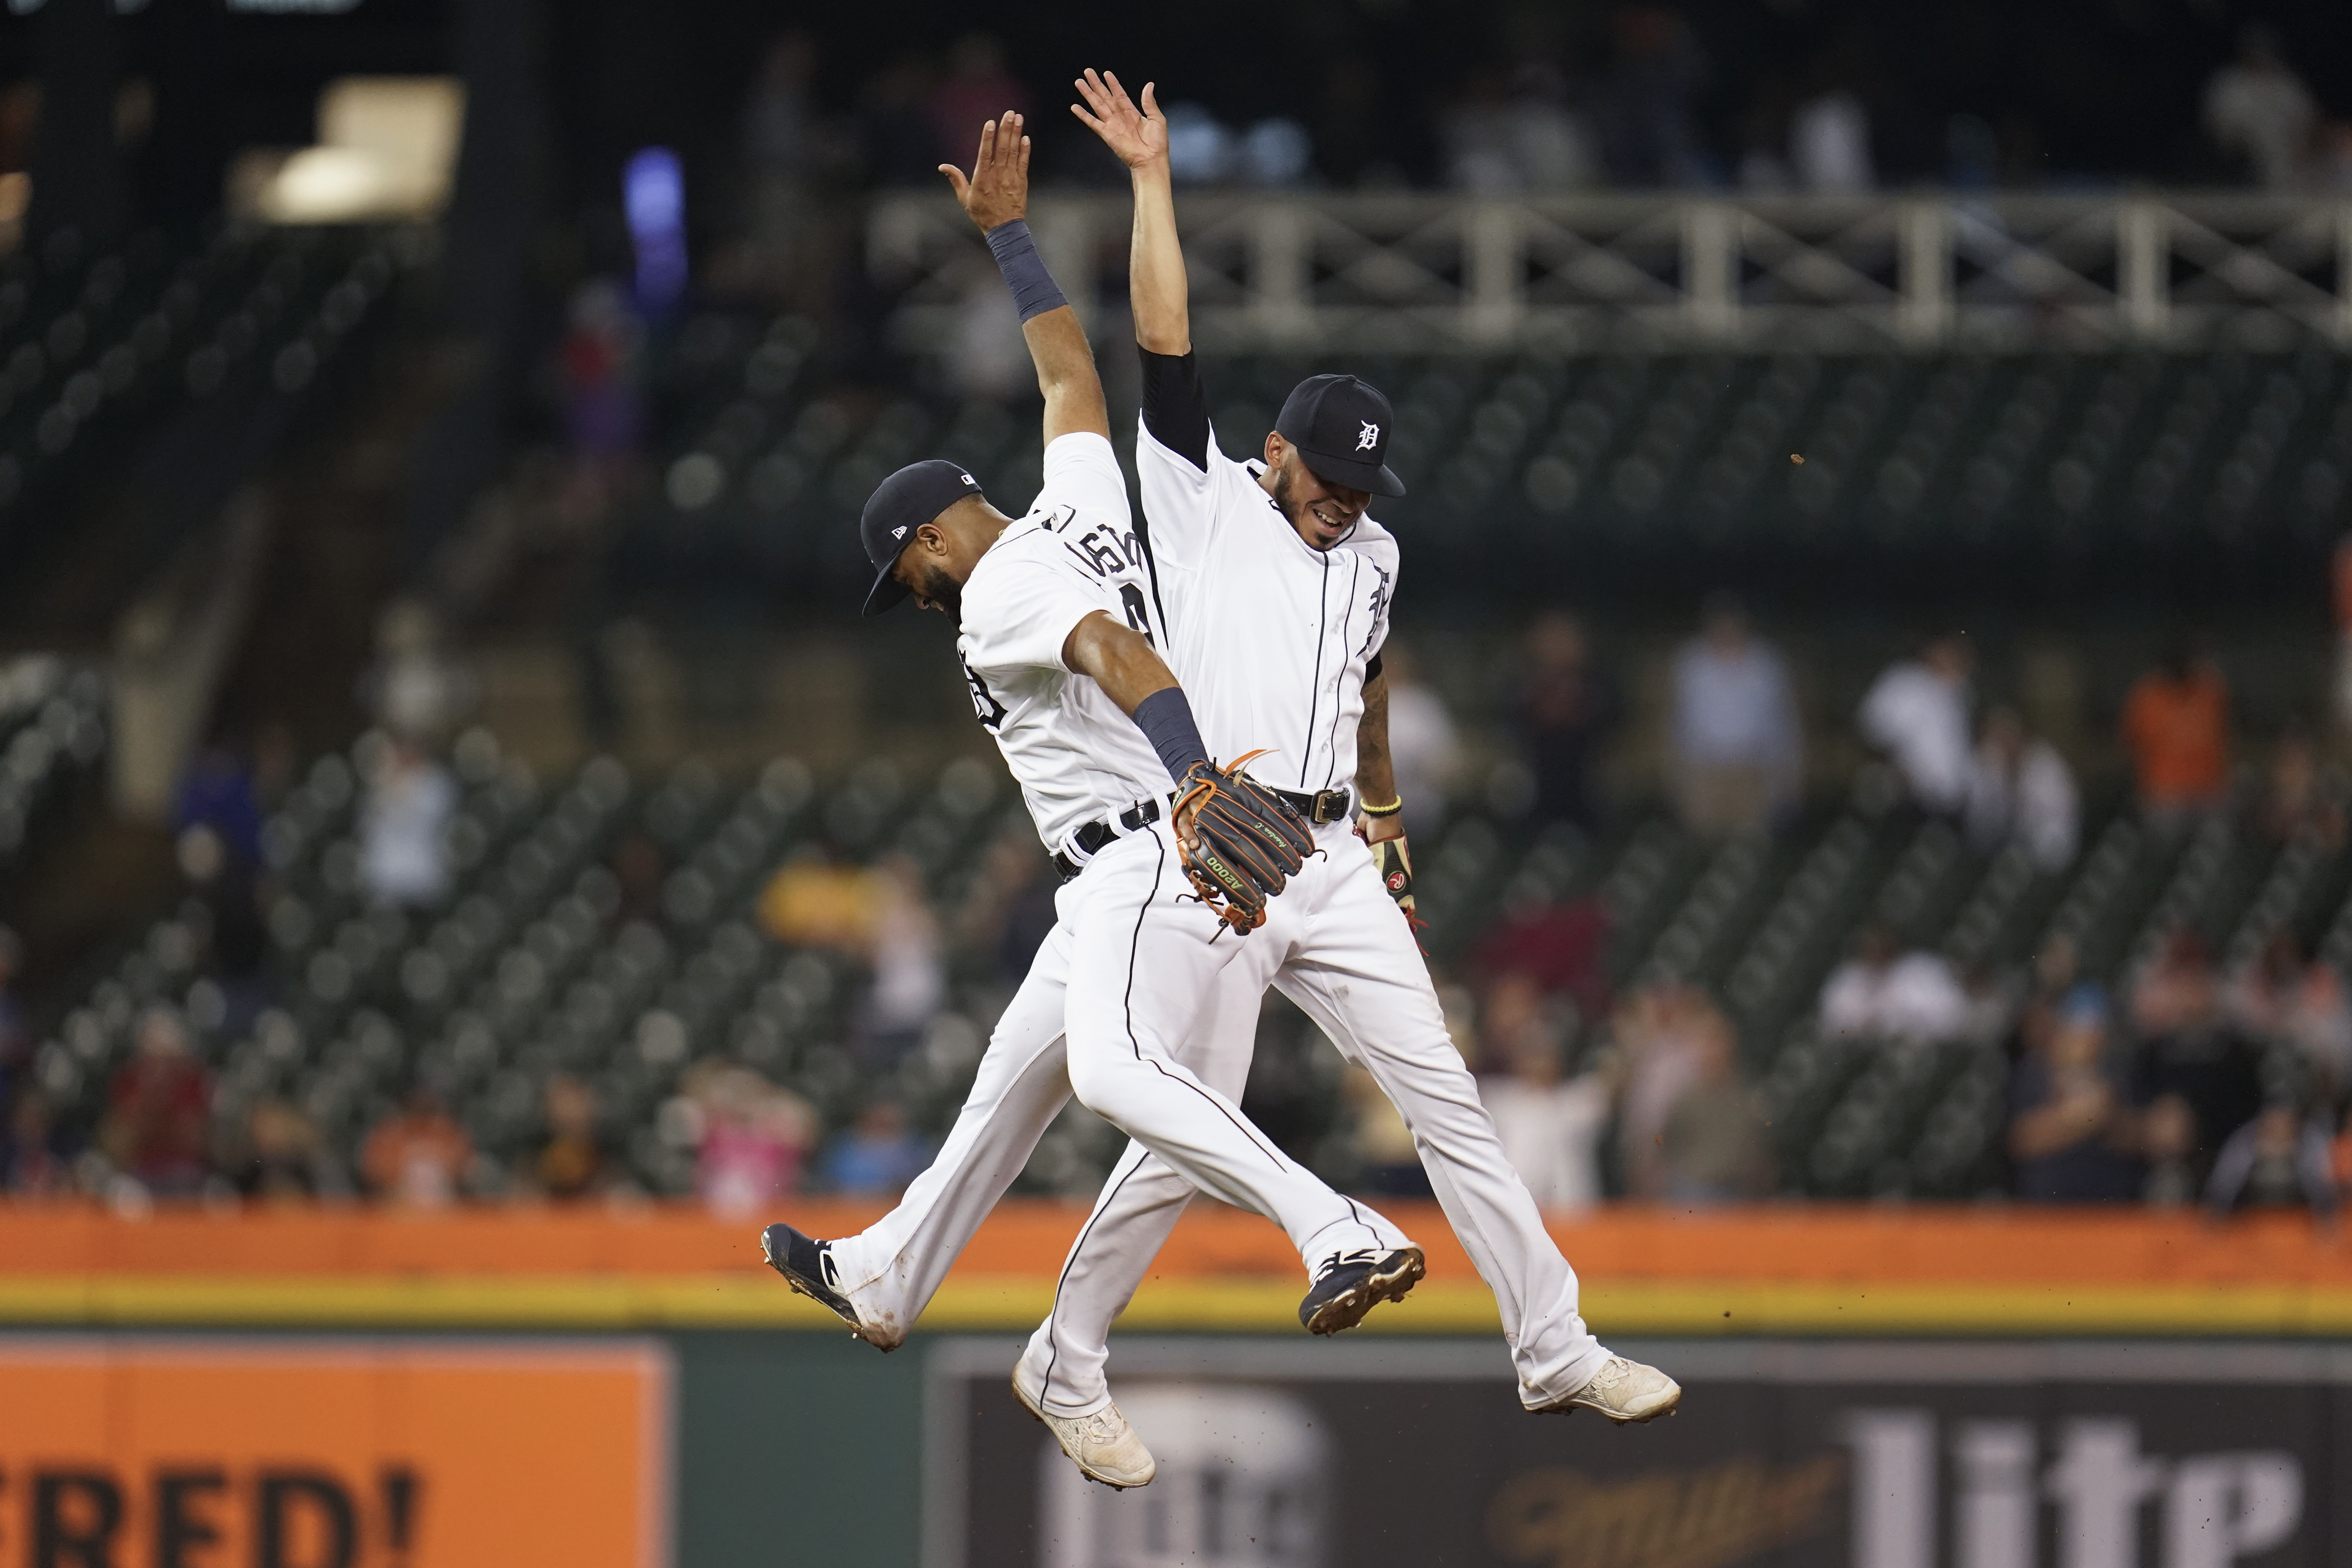 Tigers mailbag: Where does Willi Castro fit in future plans